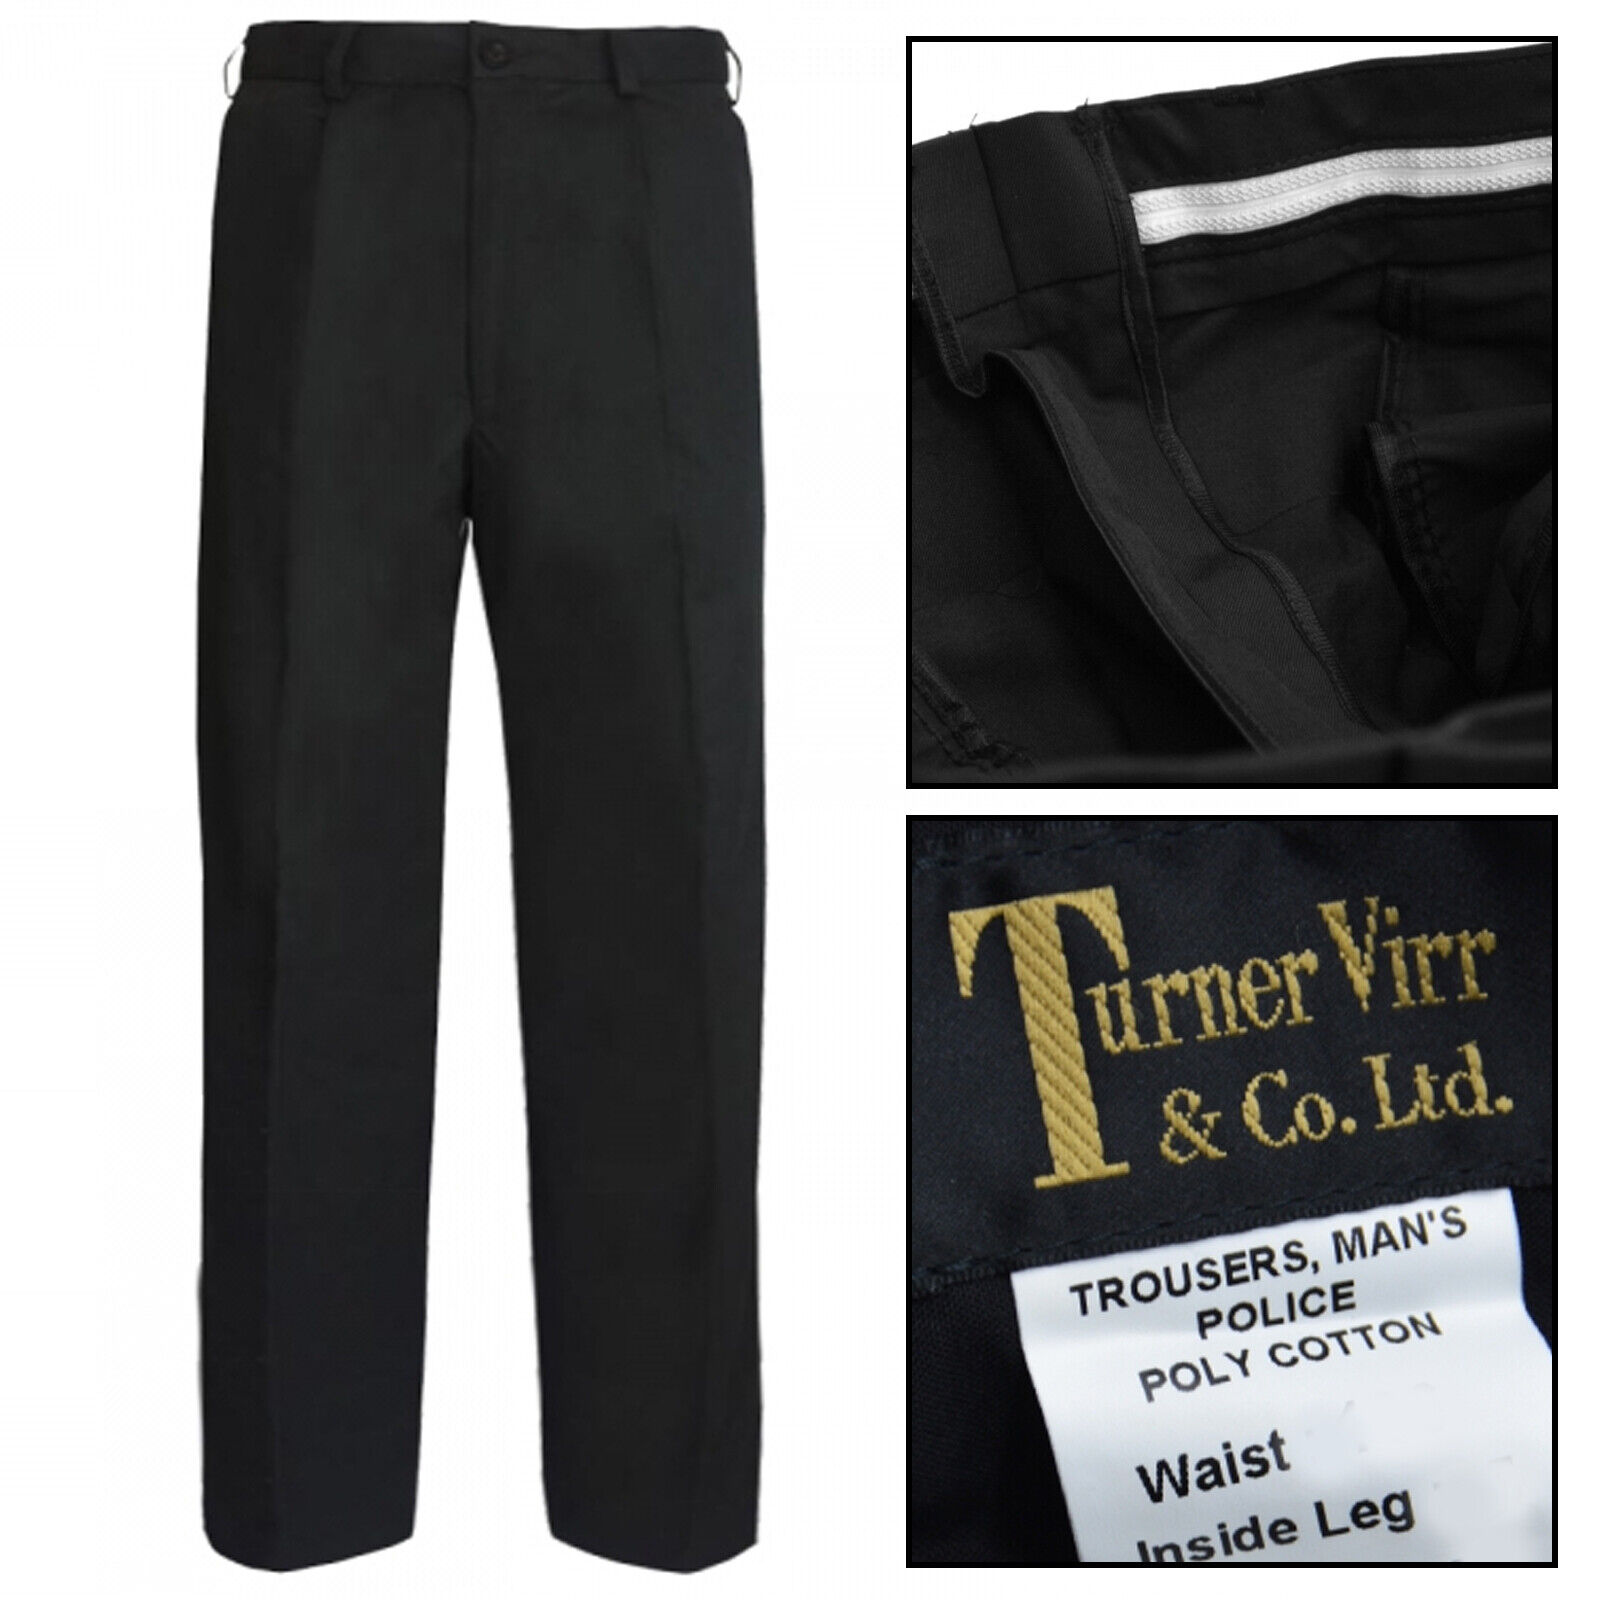 British Trousers Pants Mens Police Prison Officer Security Black Metropolian New